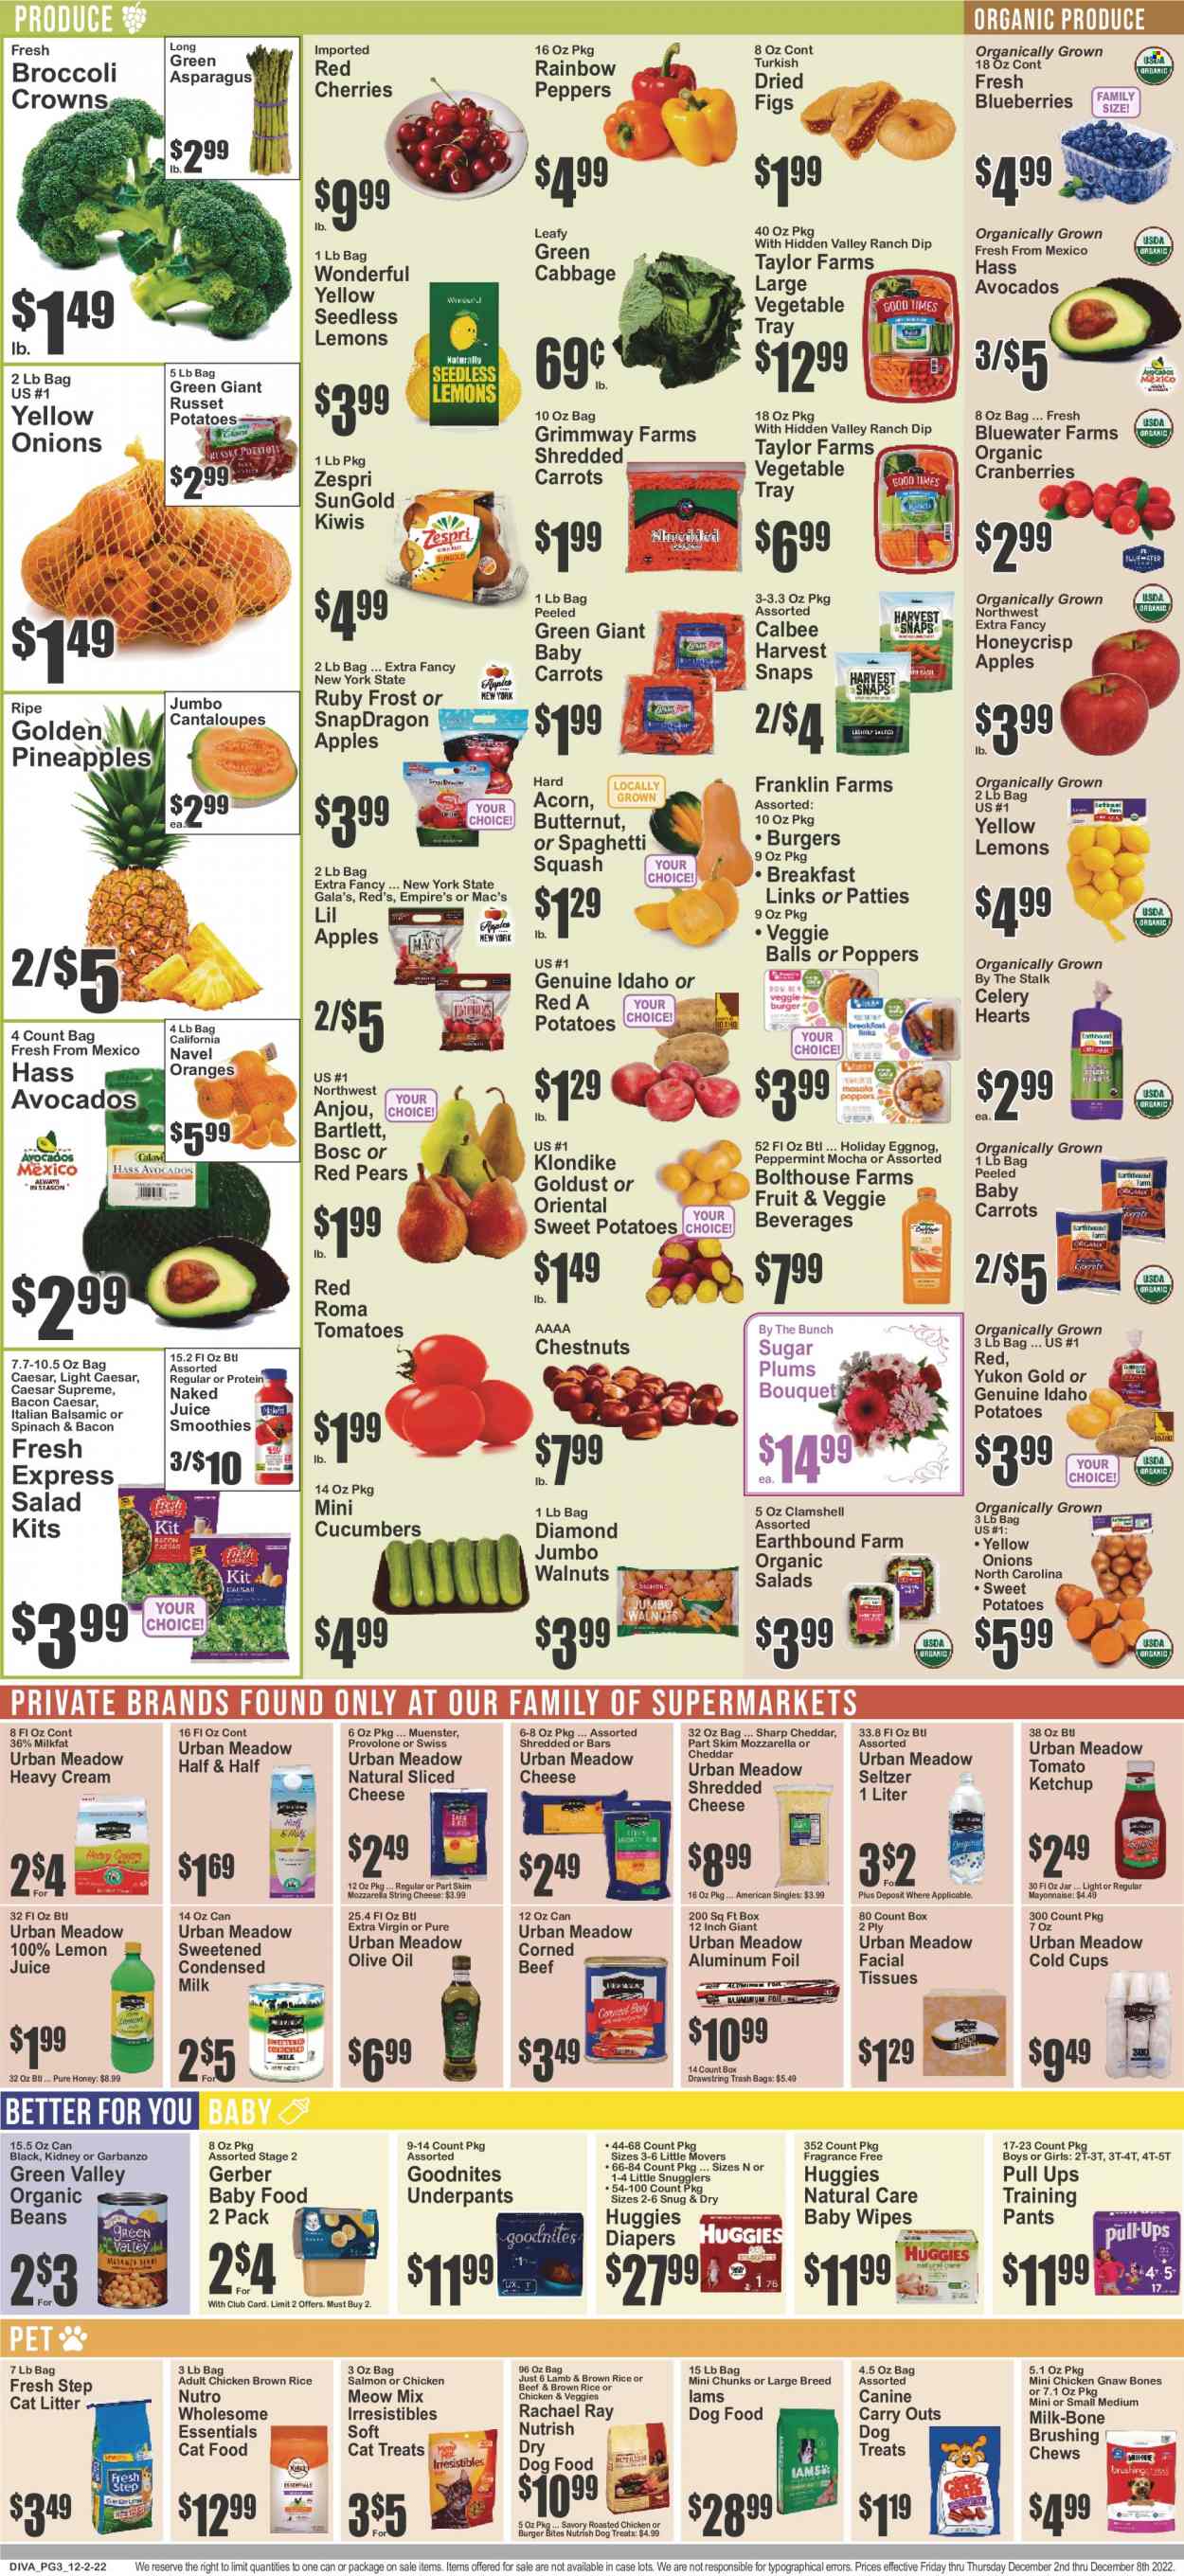 thumbnail - Key Food Flyer - 12/02/2022 - 12/08/2022 - Sales products - asparagus, beans, cabbage, cantaloupe, carrots, celery, cucumber, russet potatoes, tomatoes, potatoes, onion, salad, peppers, sleeved celery, apples, avocado, blueberries, figs, Gala, kiwi, pineapple, plums, cherries, pears, oranges, chicken roast, hamburger, corned beef, mozzarella, shredded cheese, sliced cheese, string cheese, Münster cheese, Provolone, milk, condensed milk, mayonnaise, dip, chewing gum, Gerber, sugar, Harvest Snaps, cranberries, brown rice, ketchup, extra virgin olive oil, olive oil, walnuts, chestnuts, dried figs, smoothie, seltzer water, lemon juice, eggnog, Mac’s, beef meat, wipes, Huggies, pants, baby wipes, nappies, baby pants, tissues, facial tissues, trash bags, tray, cup, animal food, cat litter, dry dog food, cat food, dog food, Meow Mix, Fresh Step, Iams, Nutrish, bouquet, butternut squash, underpants, Half and half, navel oranges. Page 4.